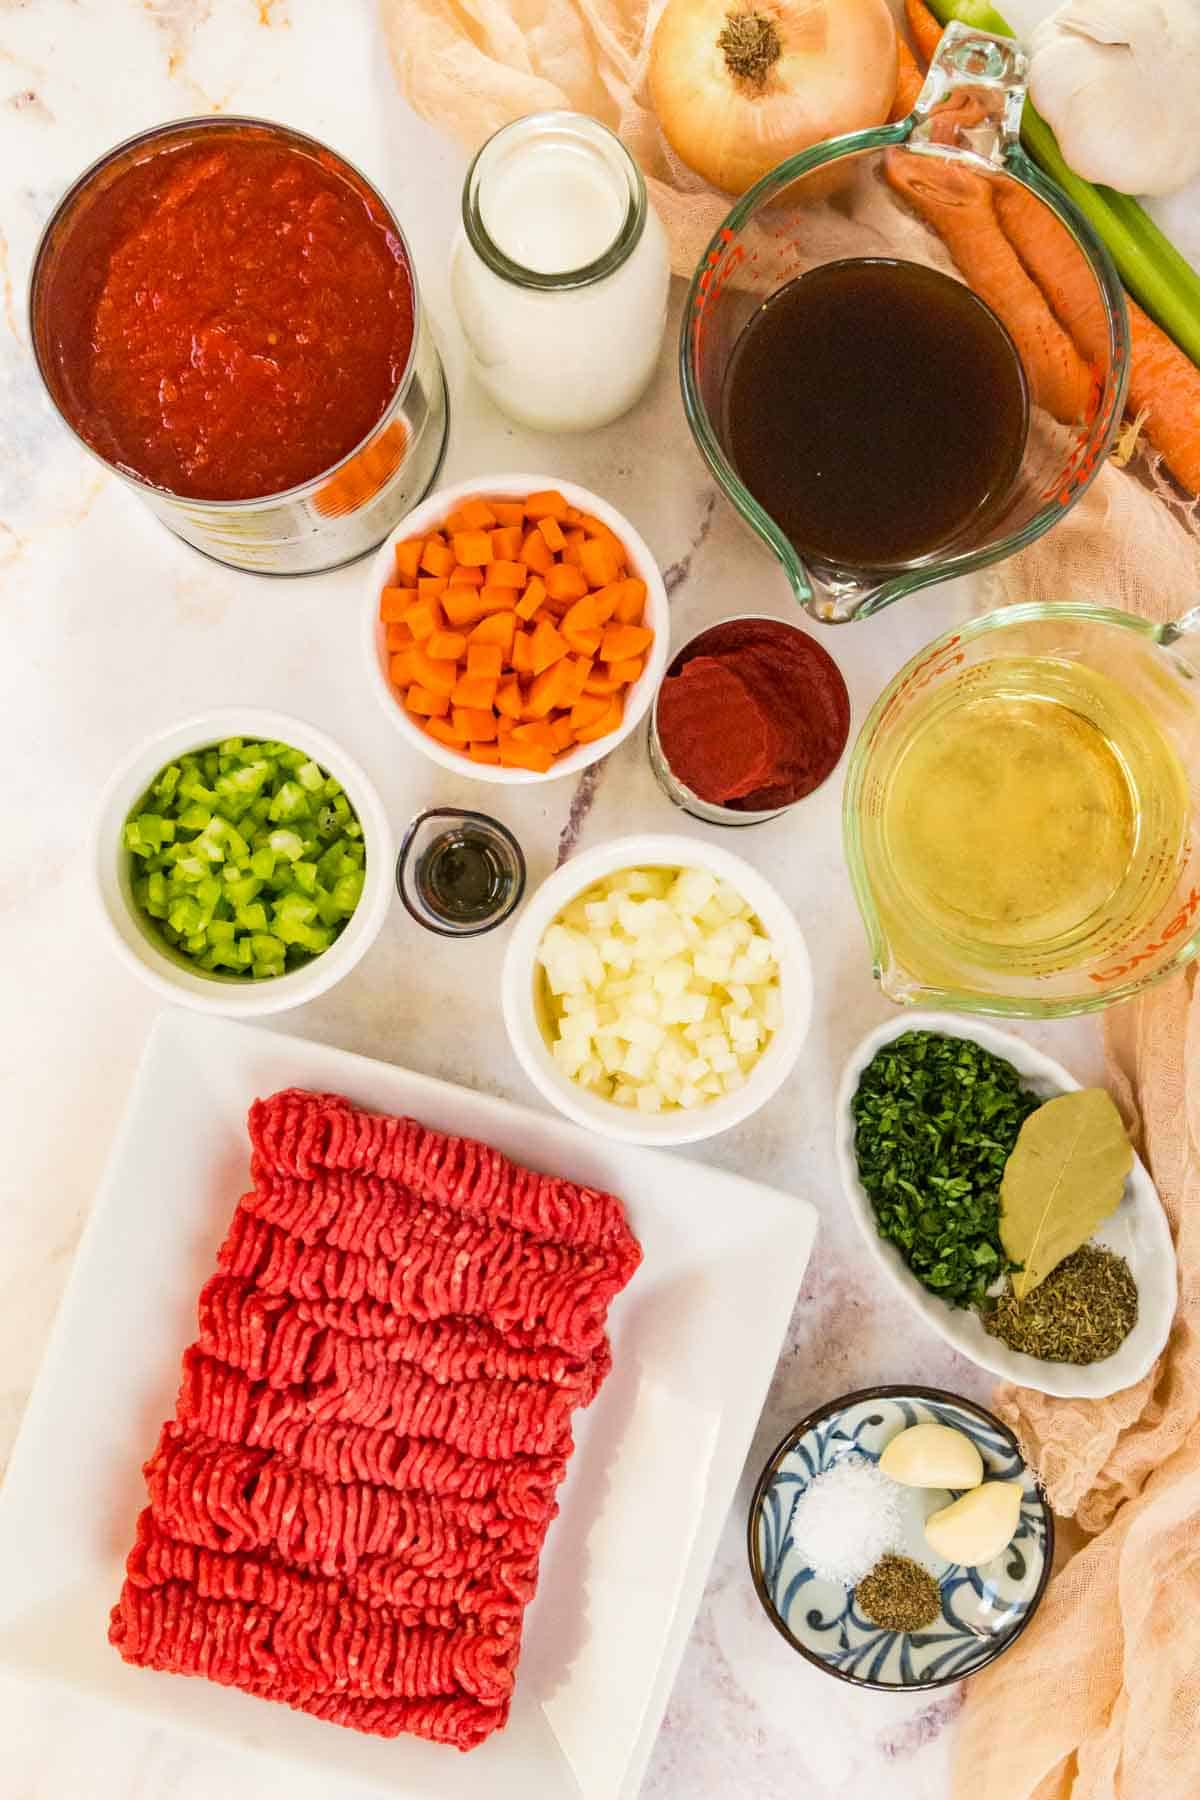 ingredients for beef bolognese sauce